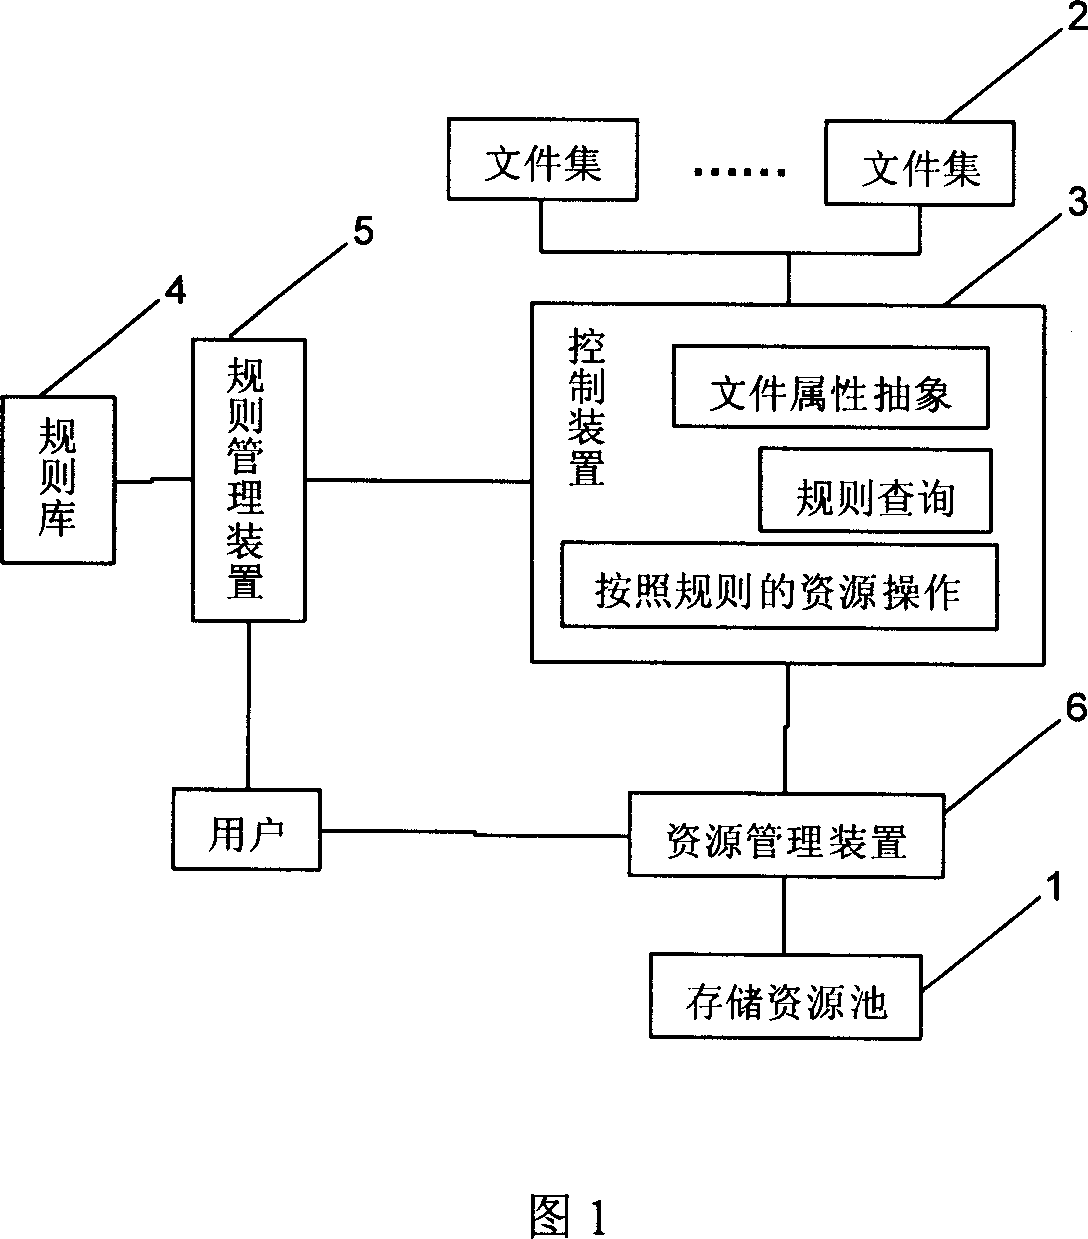 A resource allocation method and system for shared memory